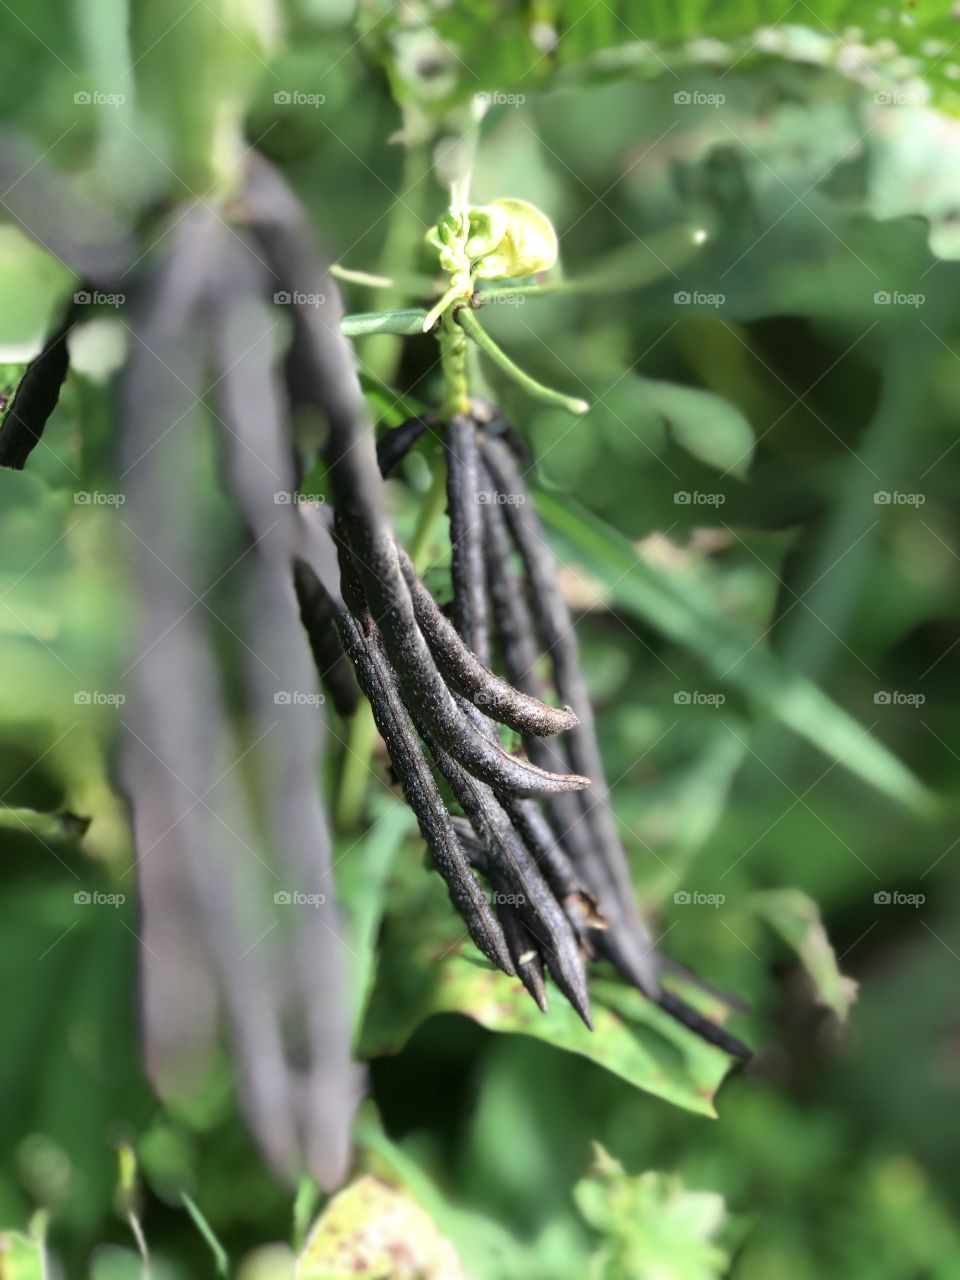 Growth green beans with blurred background 